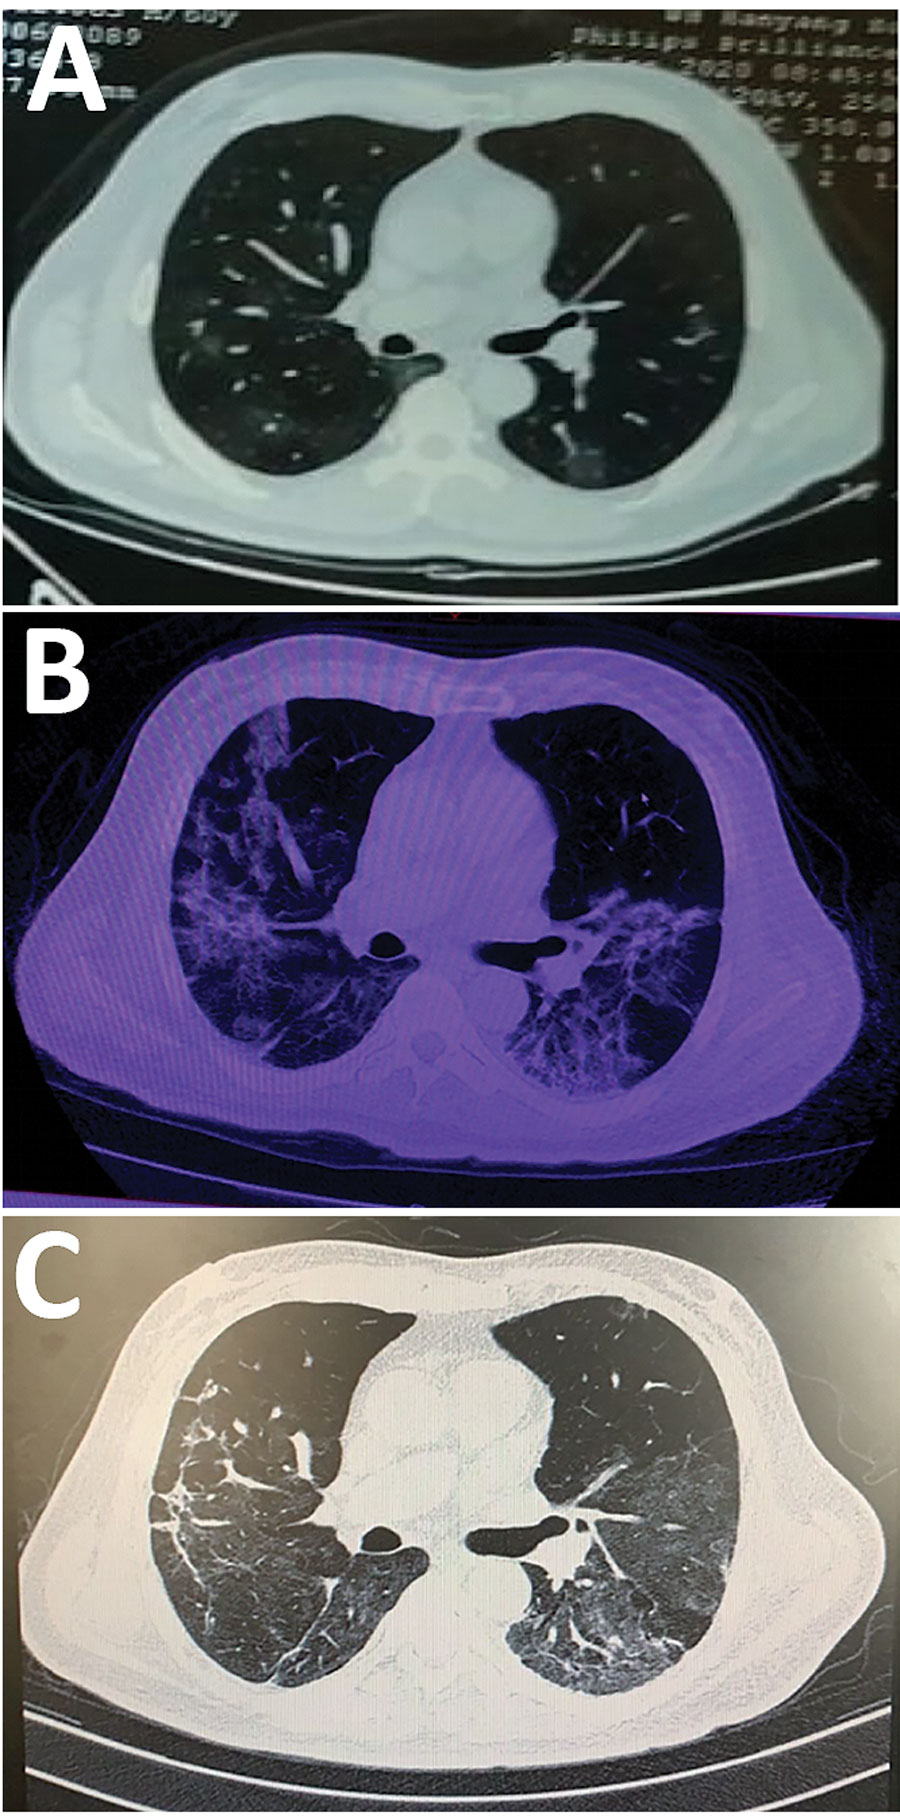 Computed tomography (CT) scan of the lungs of a 60-year-old man before and after severe acute respiratory syndrome coronavirus 2 (SARS-CoV-2) infection and rhabdomyolysis, Wuhan, China, 2020. A) CT scan before diagnosis of SARS-CoV-2 infection (3 days before hospital admission) revealed the lungs were thickened and scattered with ground-glass shadows. B) CT scan after diagnosis of SARS-CoV-2 infection with rhabdomyolysis (on hospital day 10) indicated that most of both lungs were covered with gr